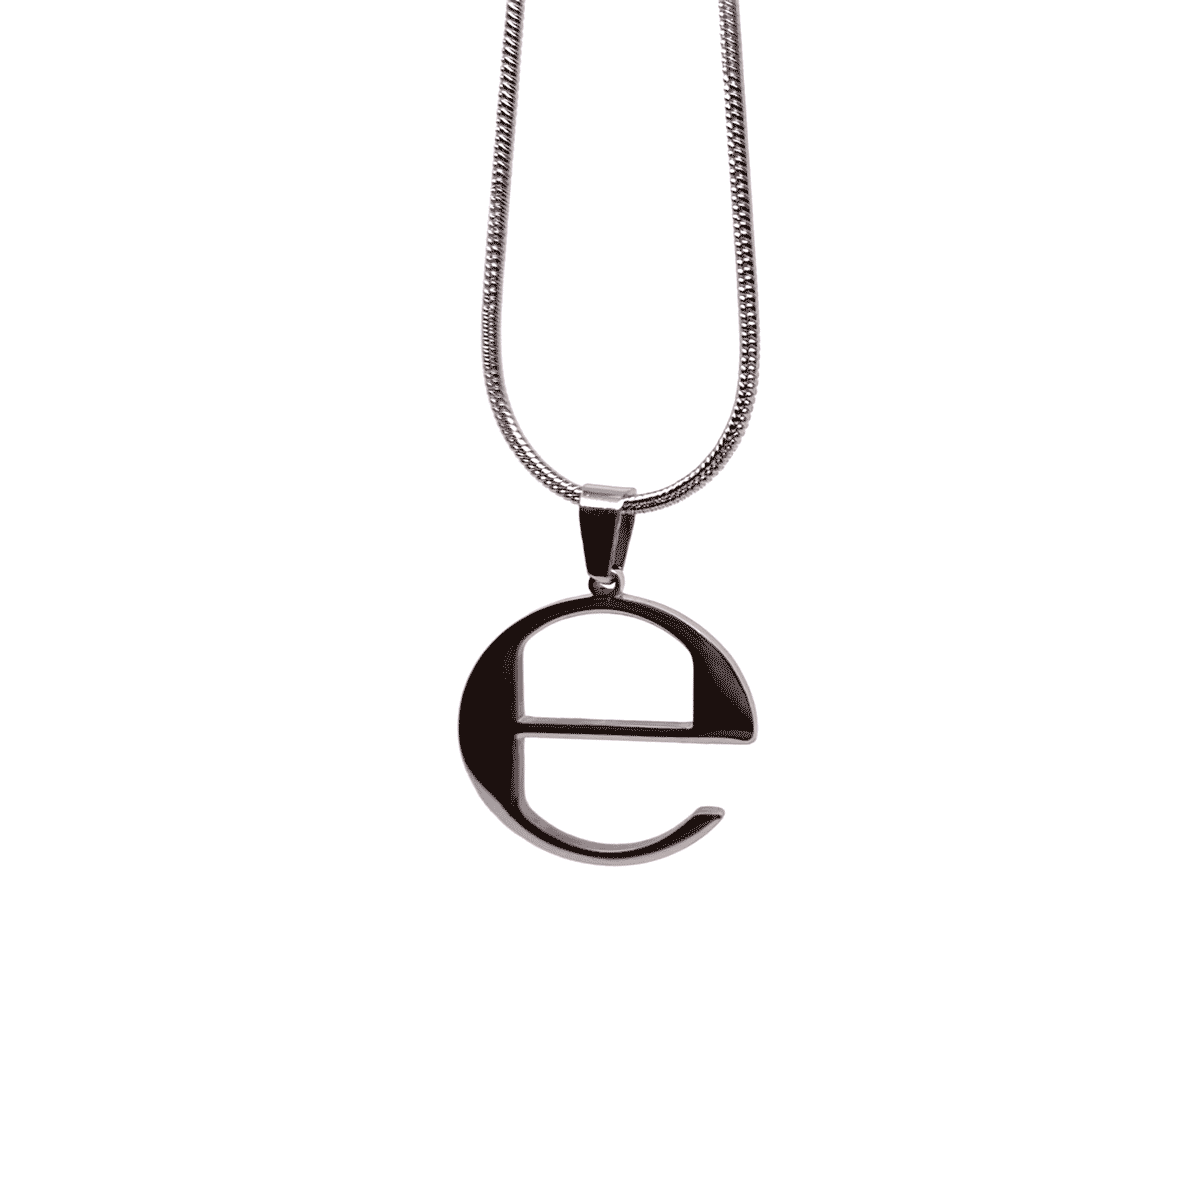 Ecco2k "E" Album Fan-Made Small Stainless Steel Pendant Chain Necklace - 1 Inch Version - 60cm Stainless Steel Chain